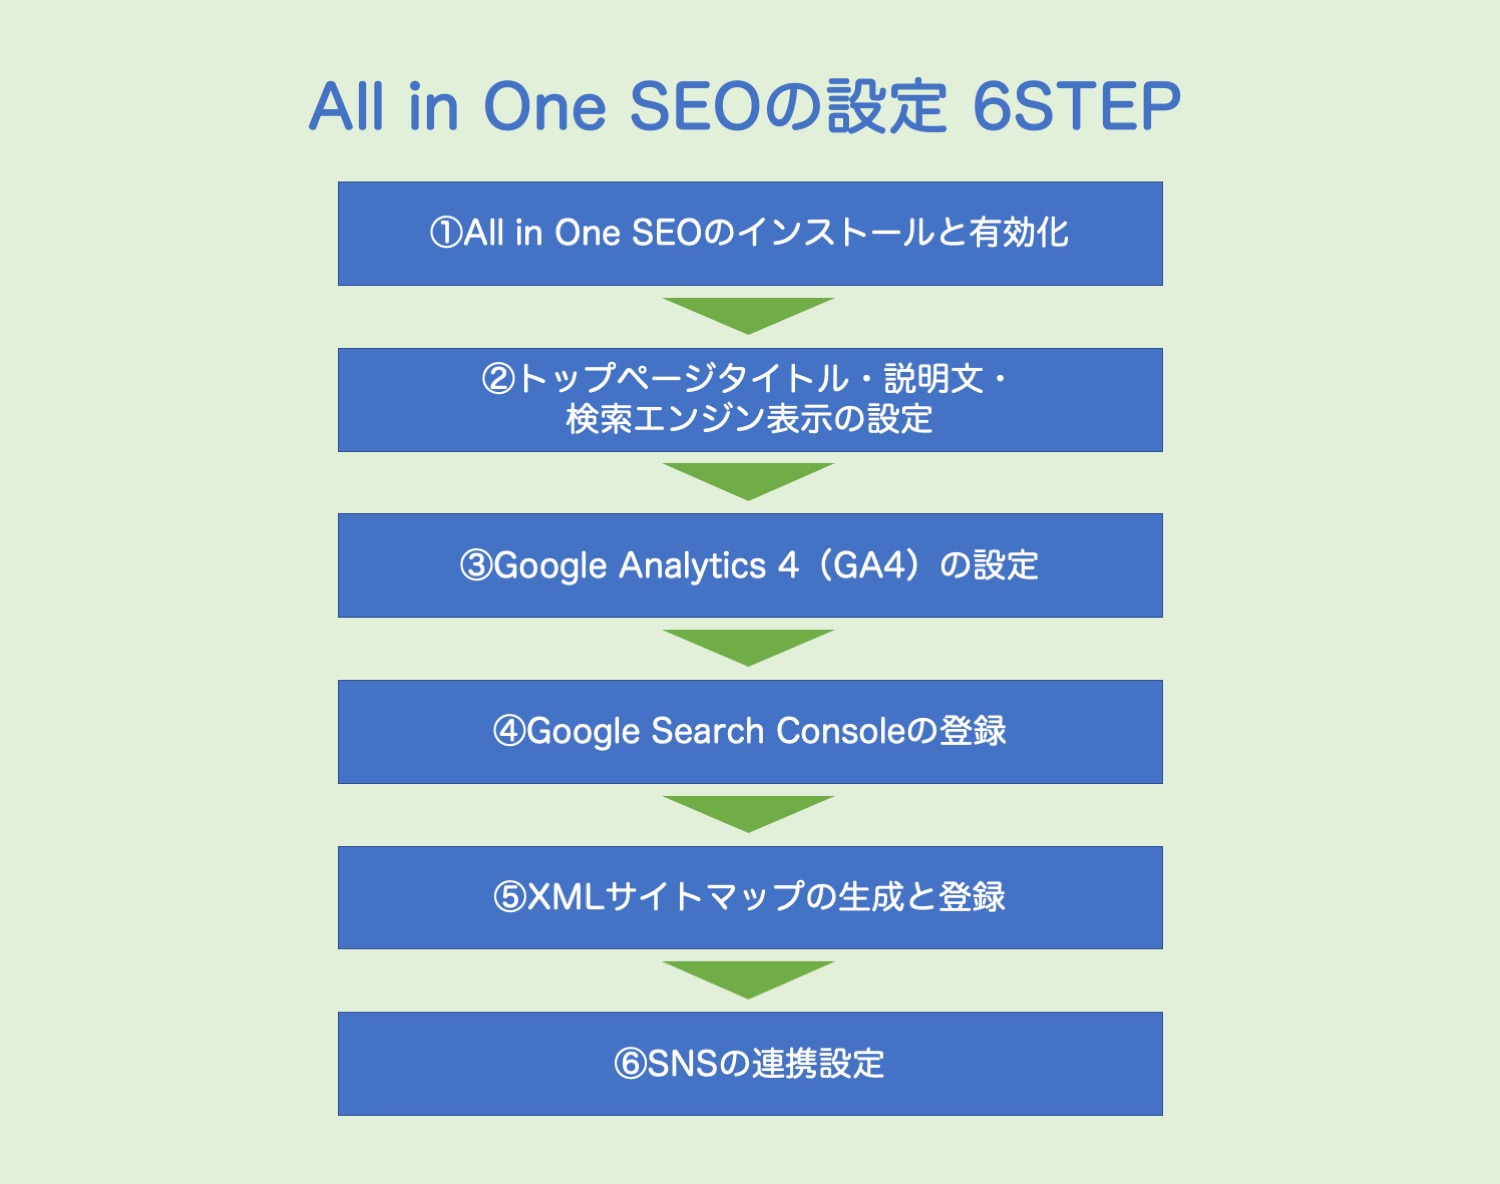 All in One SEOの設定手順